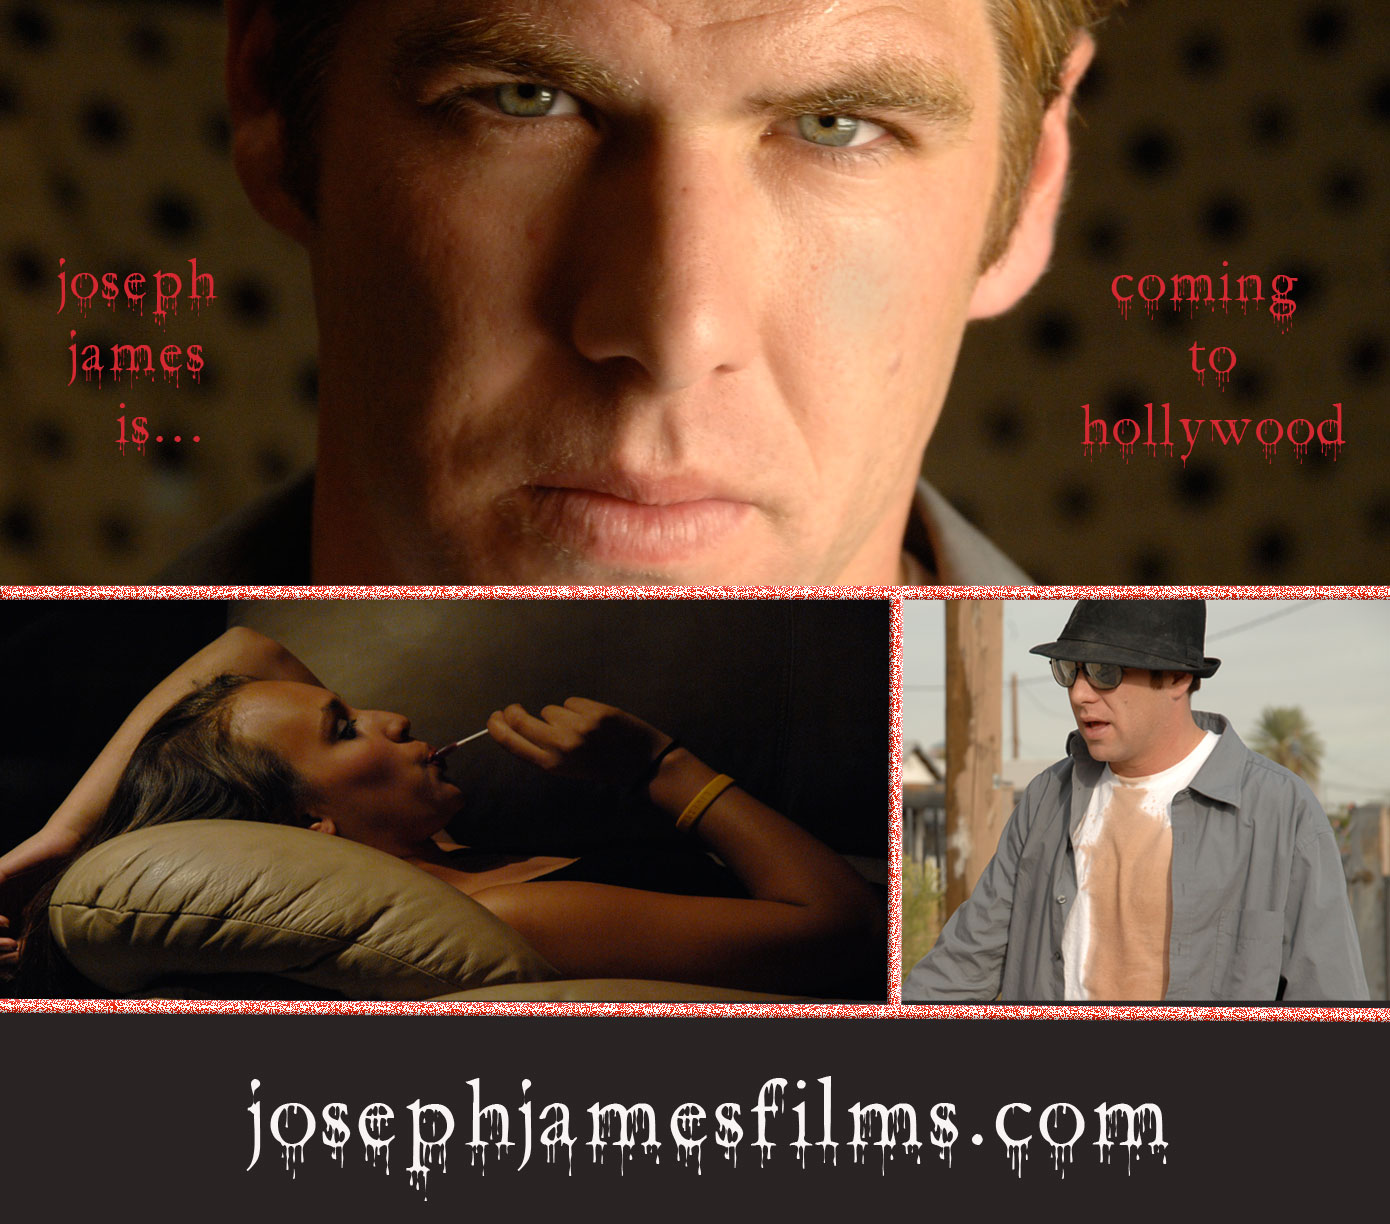 Joseph James in Coming to Hollywood